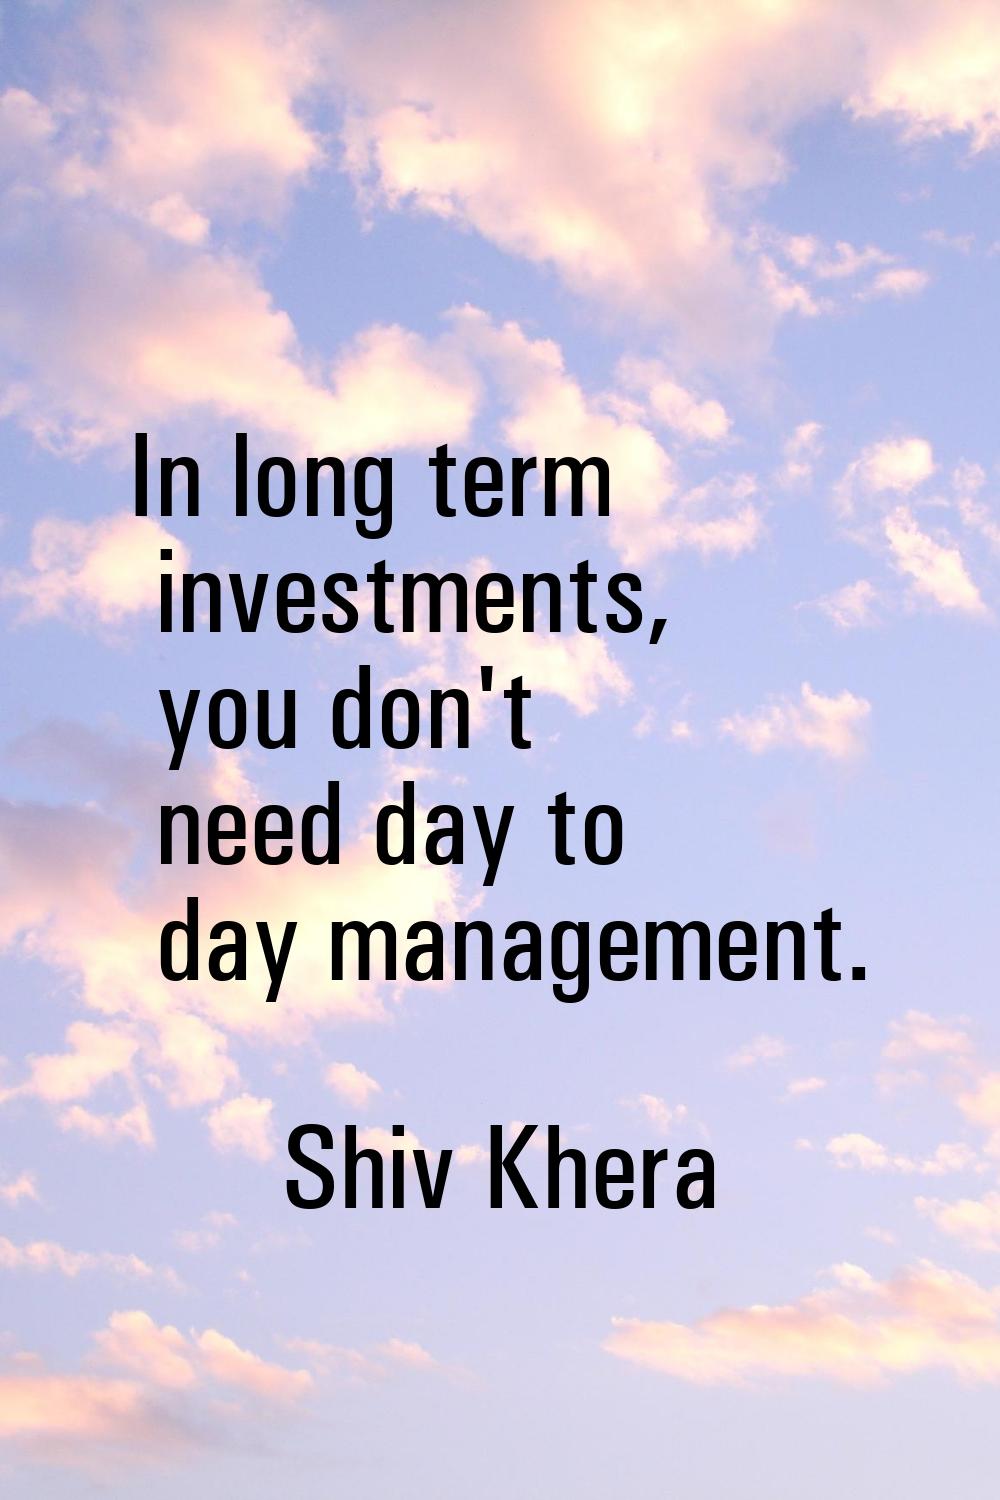 In long term investments, you don't need day to day management.